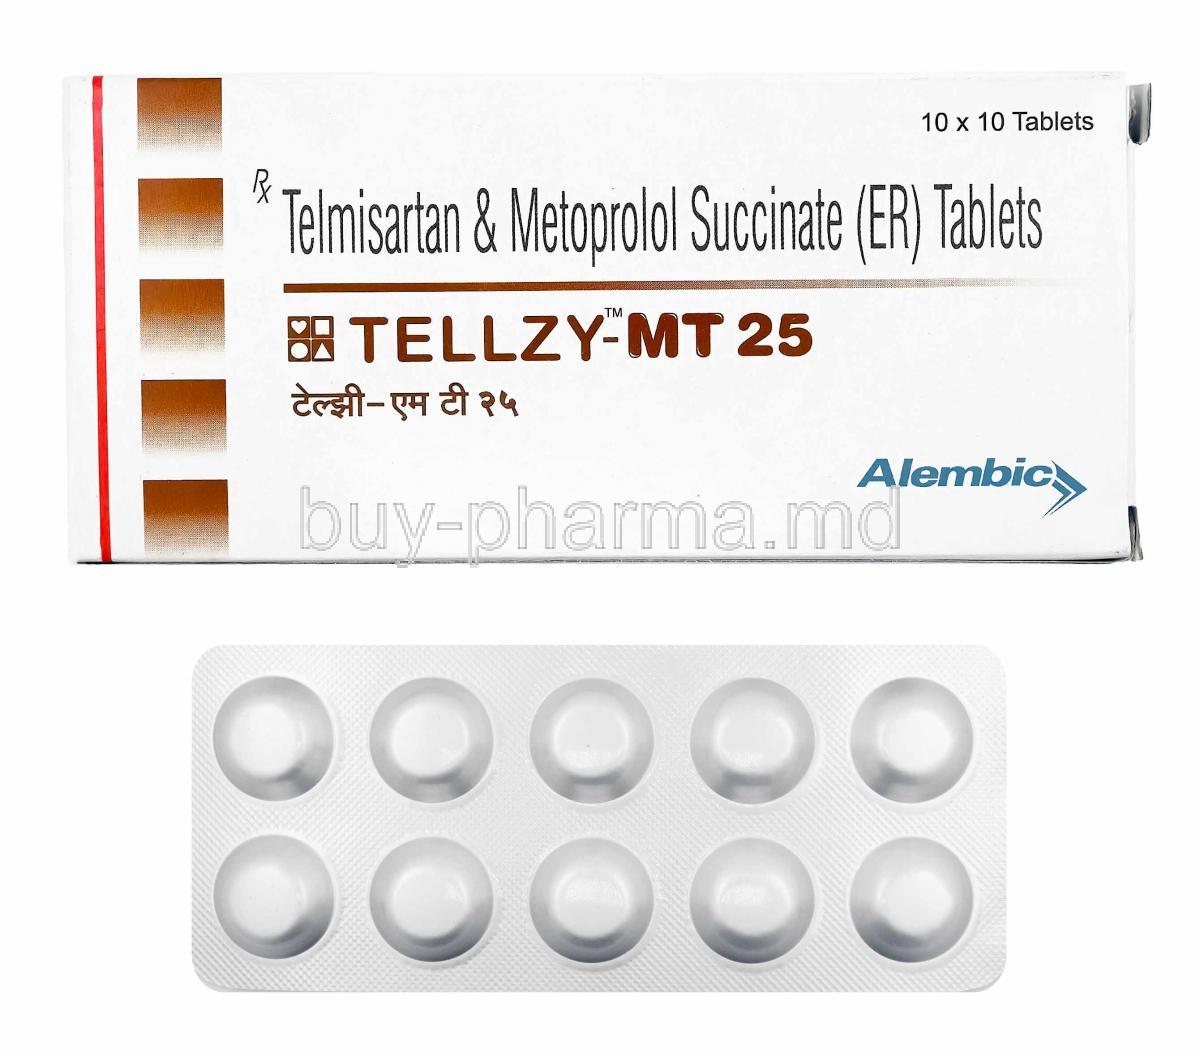 Tellzy-MT, Telmisartan and Metoprolol Succinate 25mg box and tablets